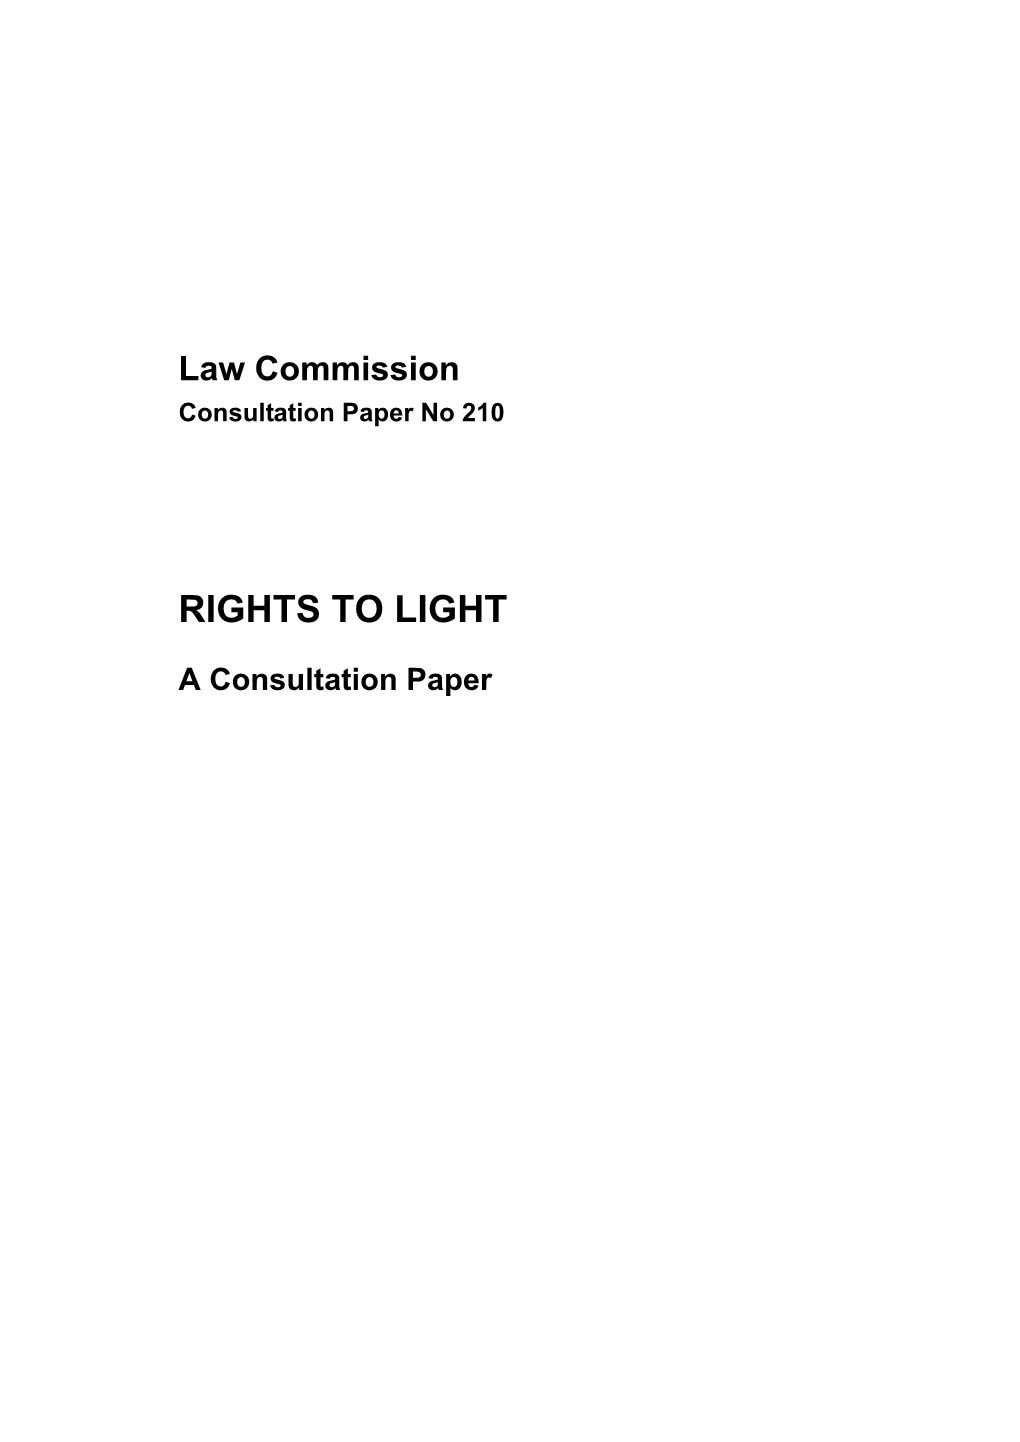 Rights to Light Consultation